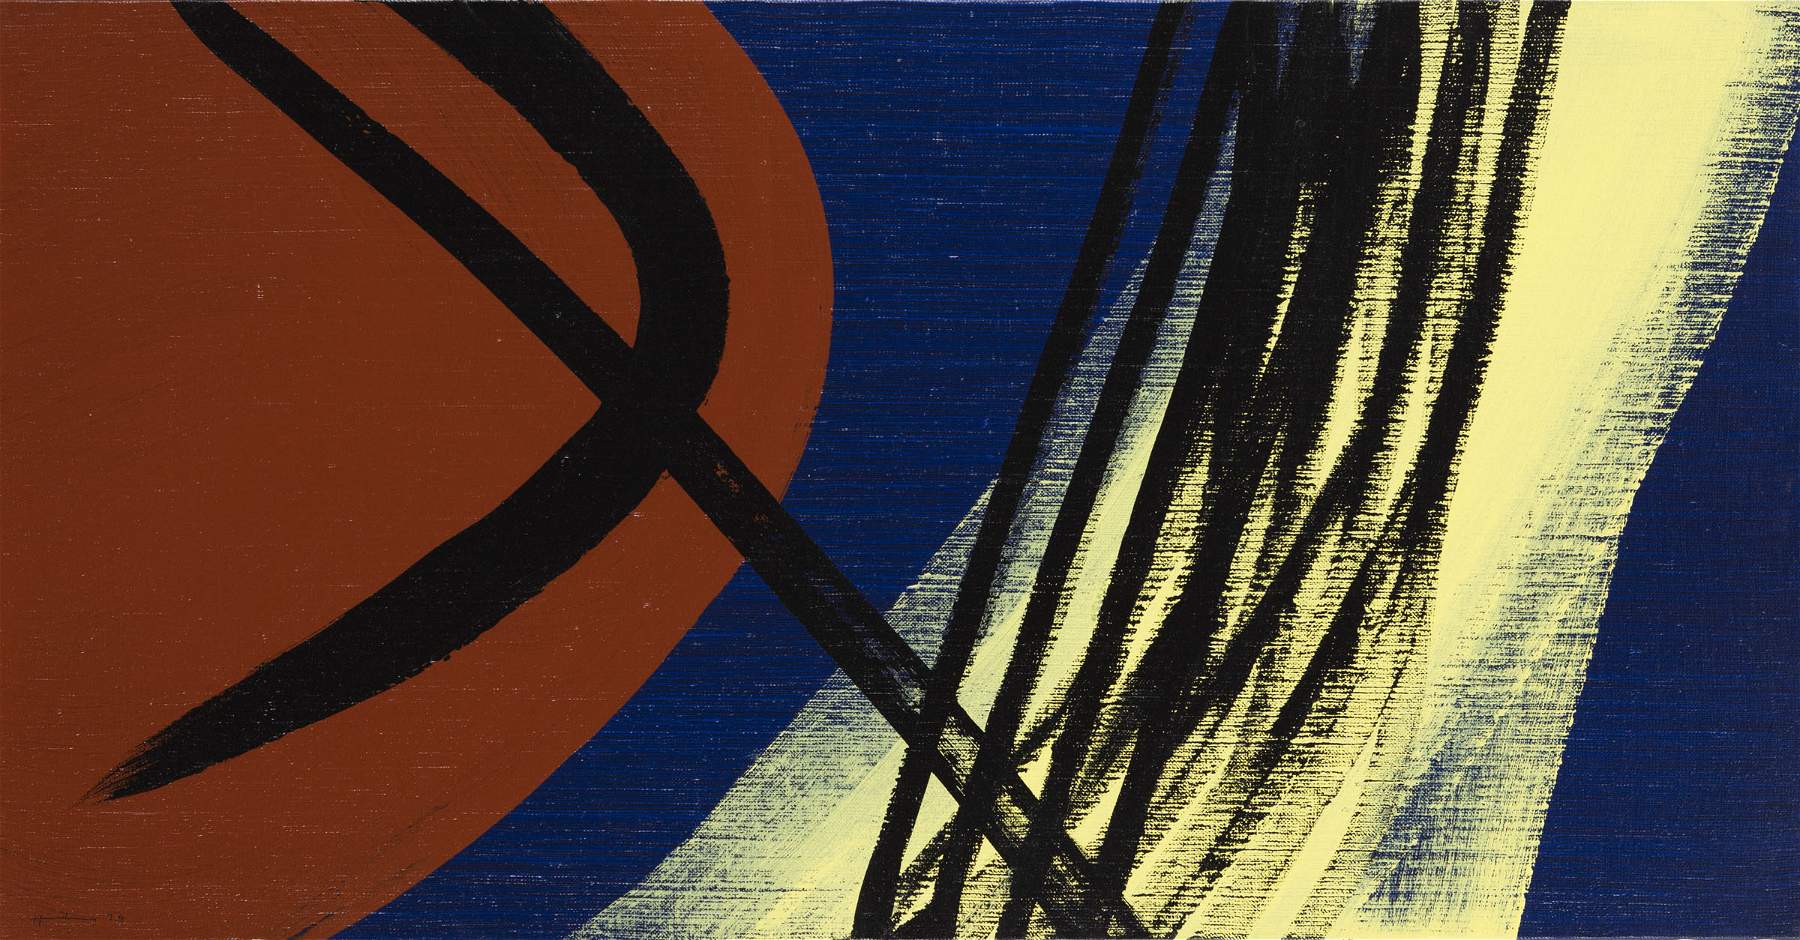 Hans Hartung stars at the National Gallery of Umbria